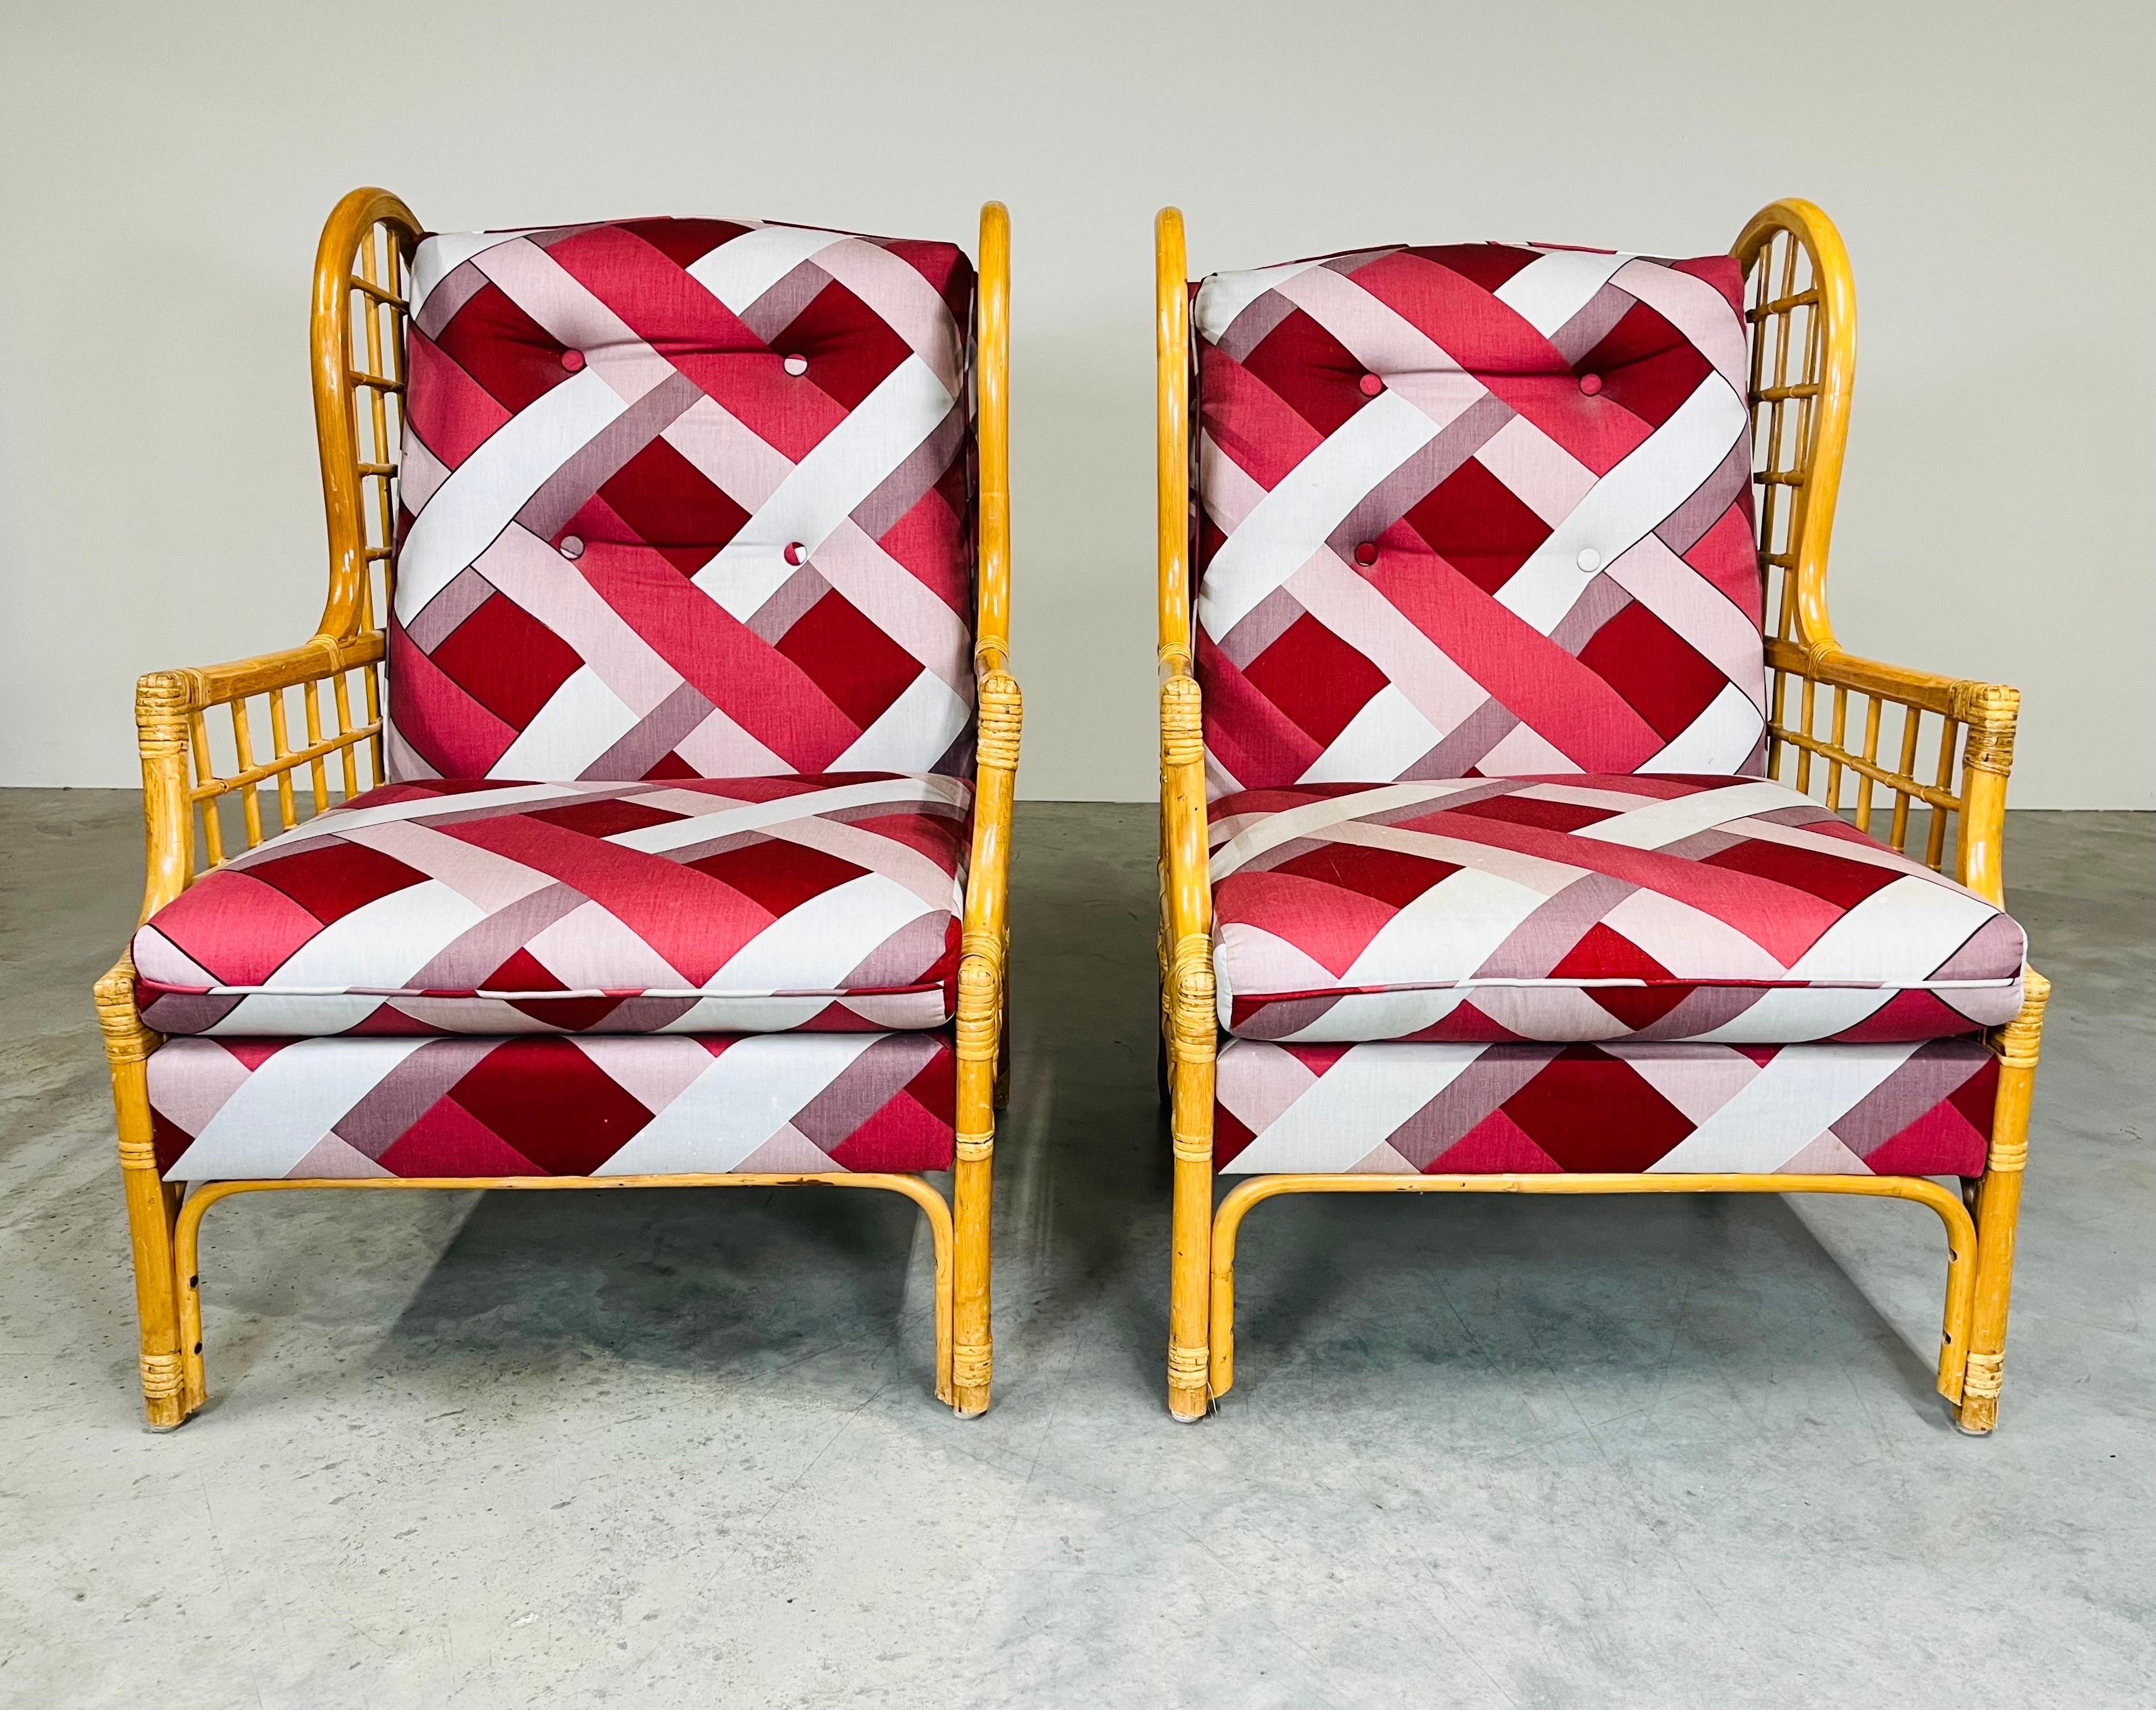 Vintage Mcguire style rattan wingback style arm chairs featuring wrapped rattan lattice patterned sides and back with soft backrests and seat cushions. Incredibly comfortable. In excellent vintage condition having sturdy frames that feature strong